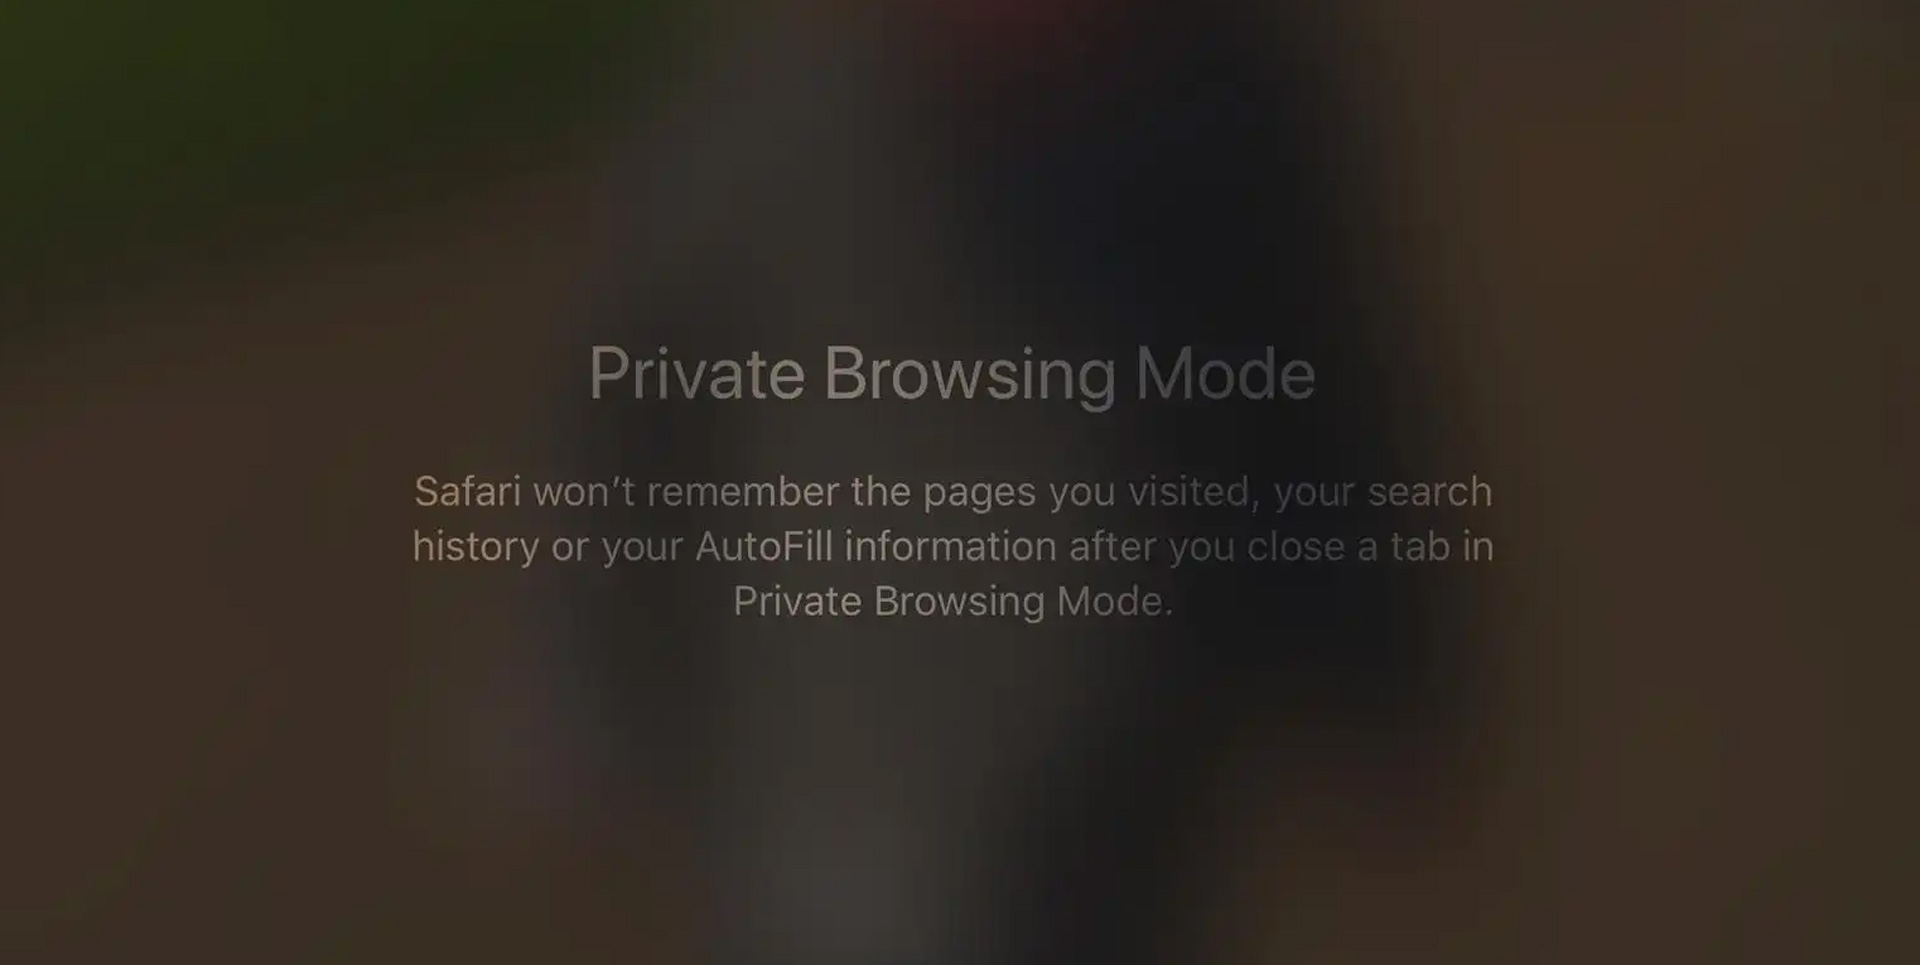 How to turn on incognito mode?